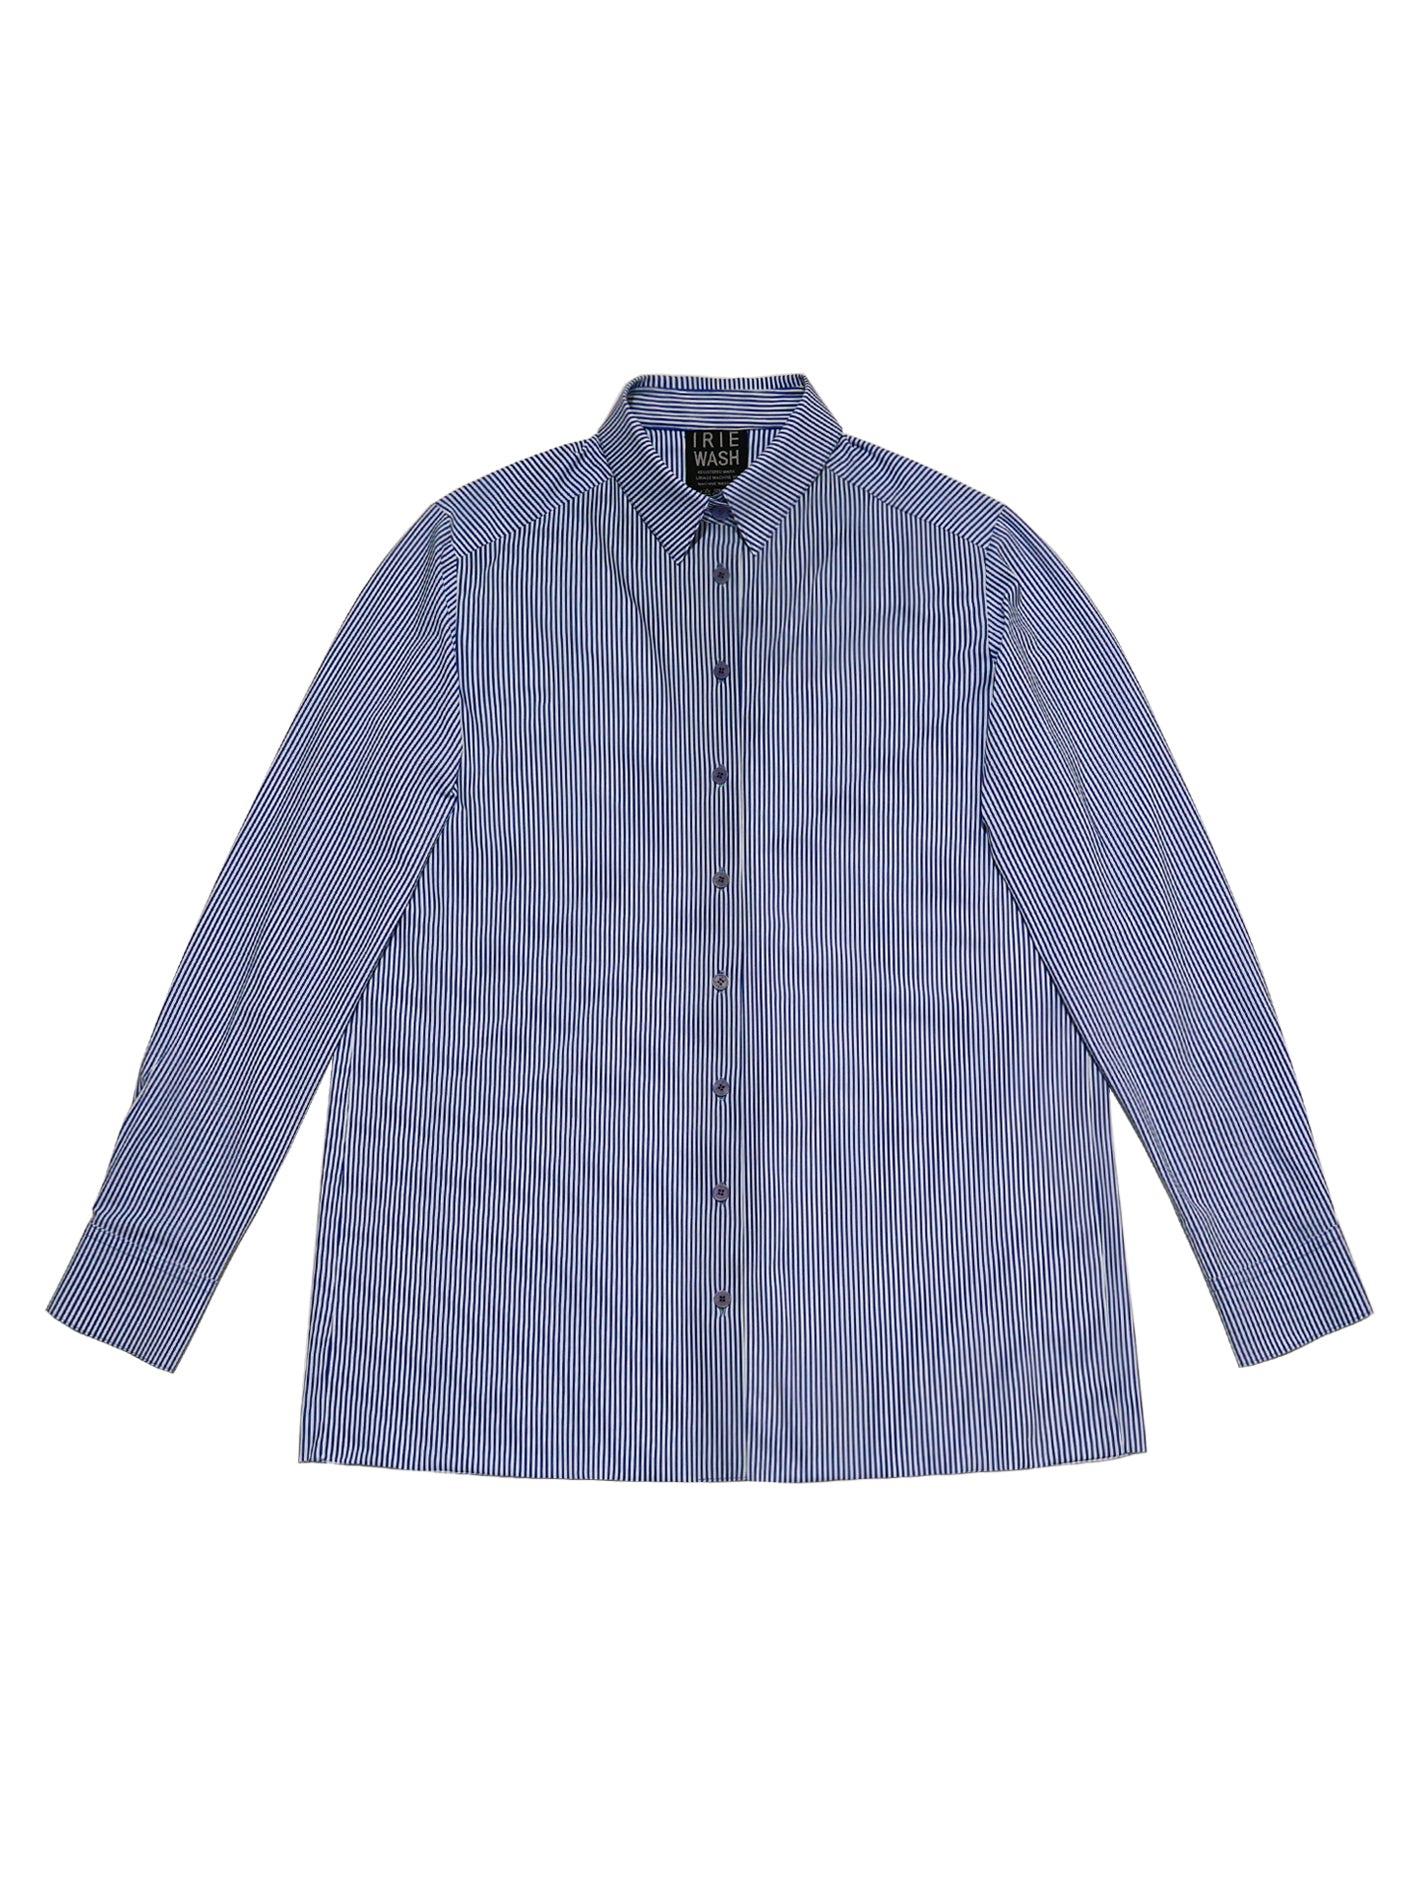 CHEMISE STYLE HOMME, Rayures Fines Bleu Clair